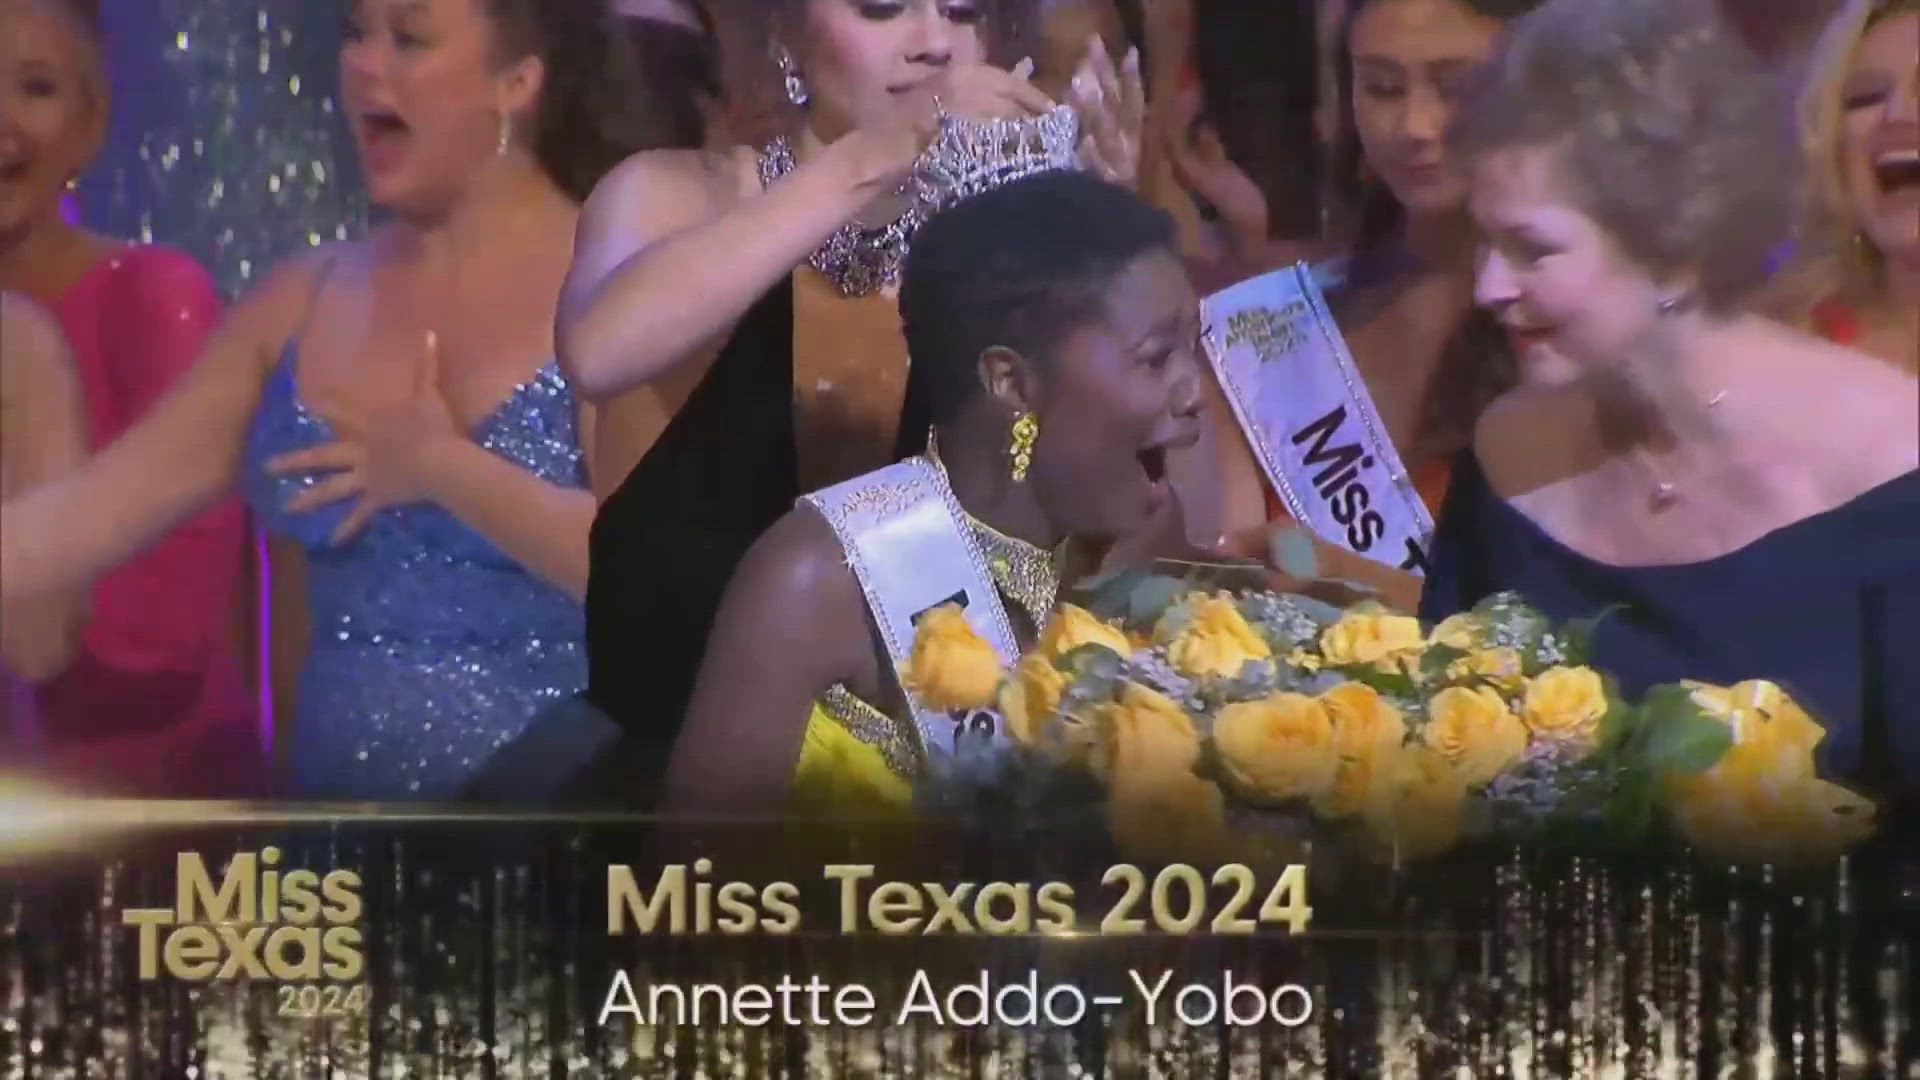 She is the first immigrant-born Miss Texas.